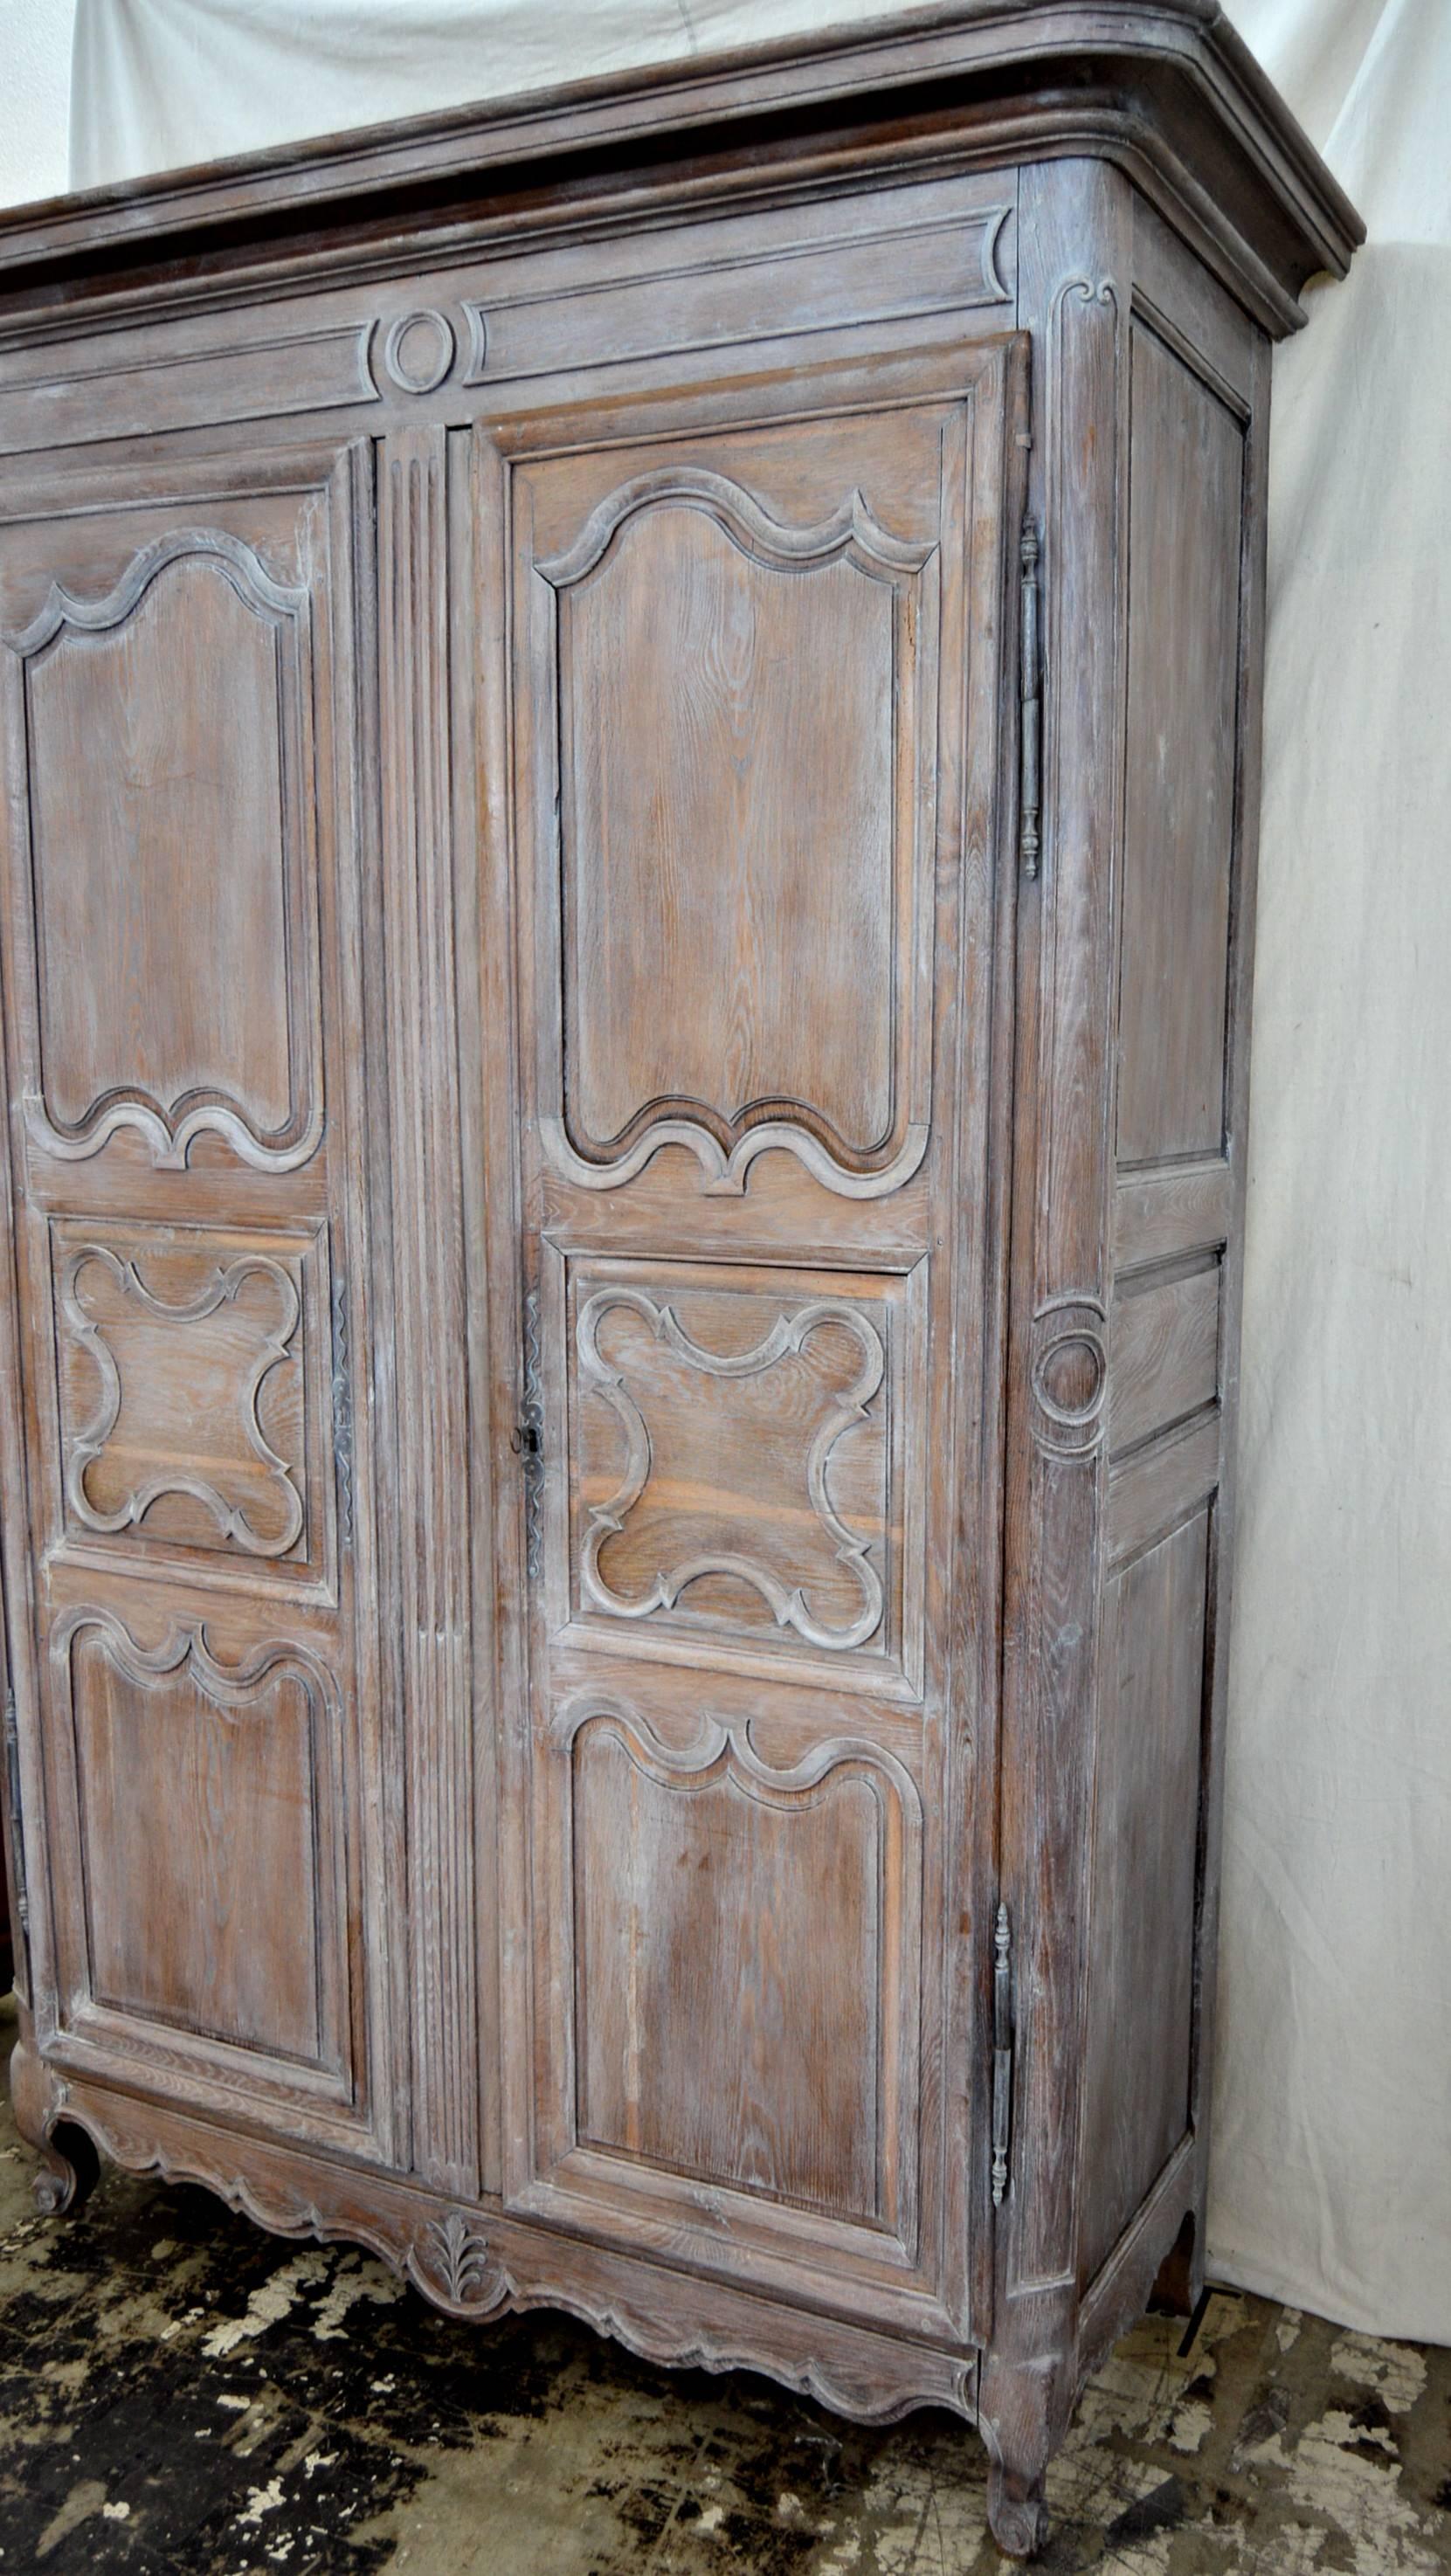 19th century French armoire.